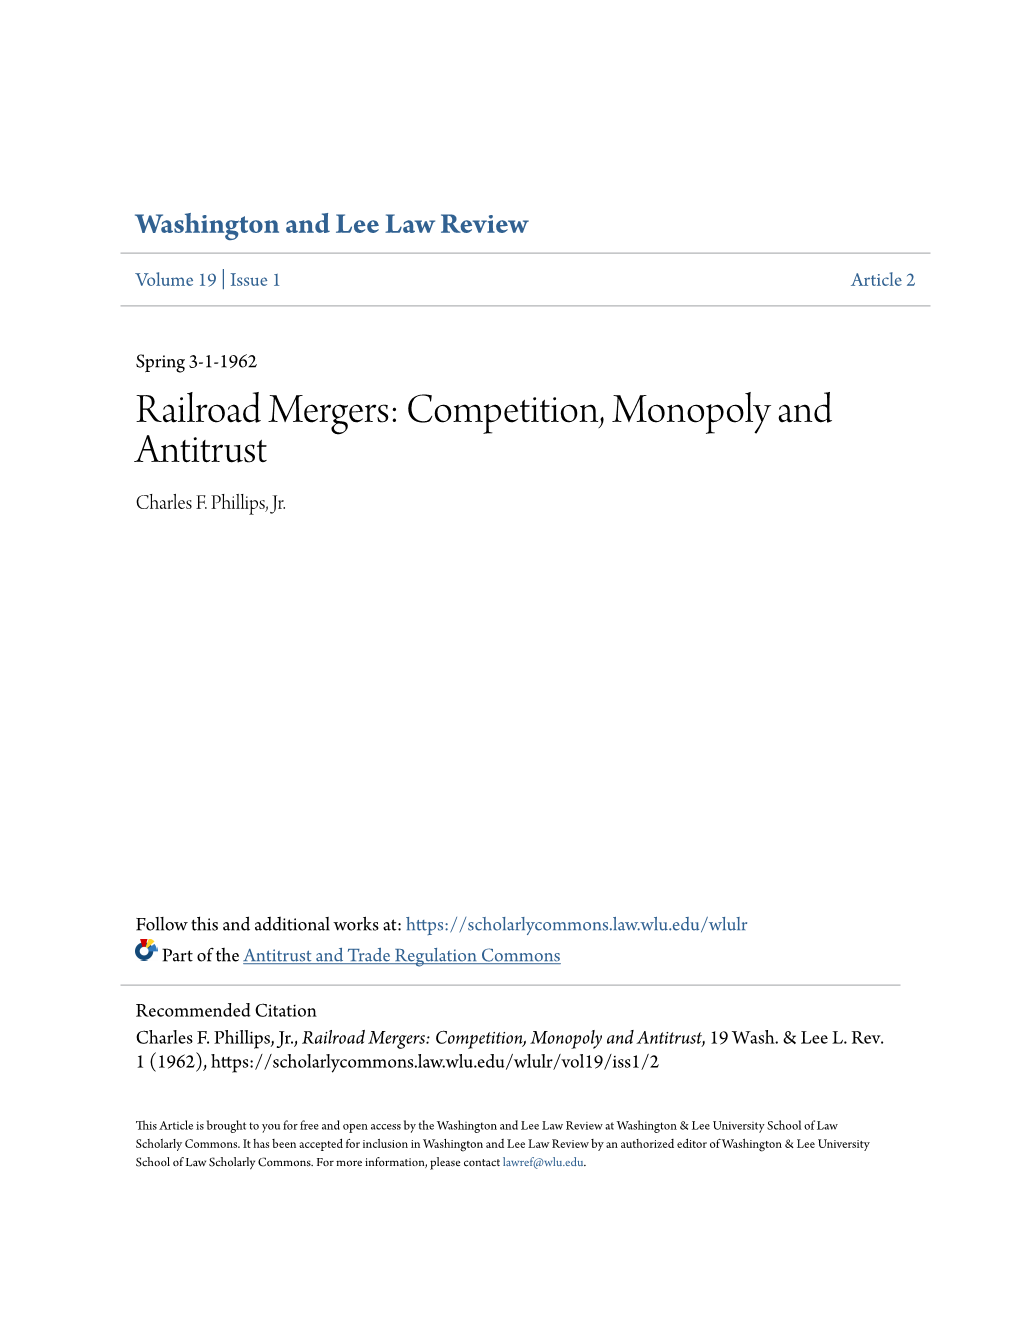 Railroad Mergers: Competition, Monopoly and Antitrust Charles F